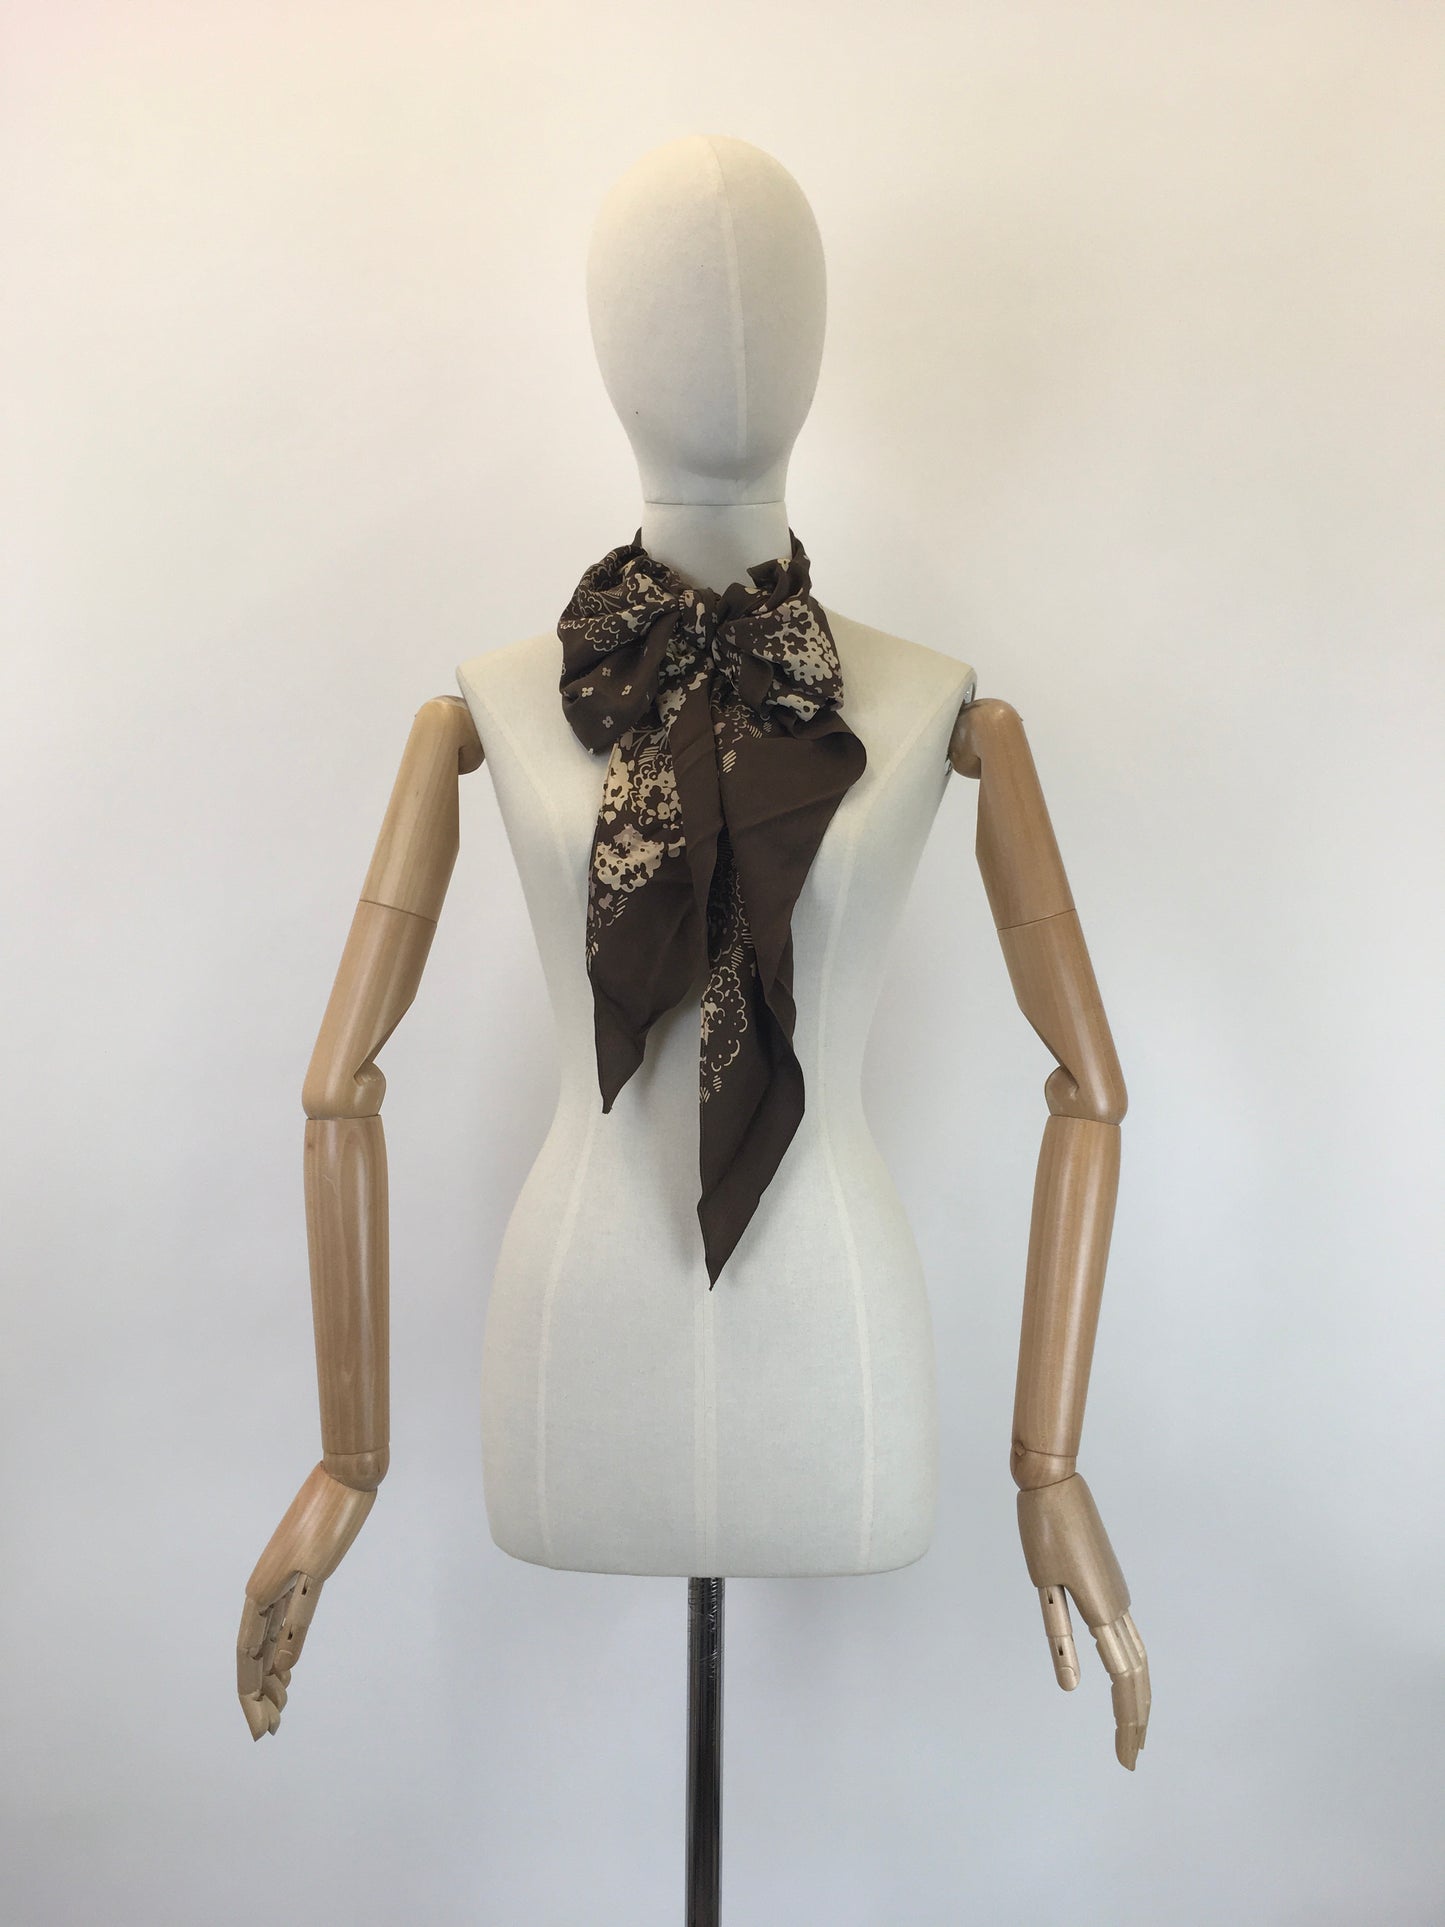 Original 1930’s Stunning Deco Pointed Scarf - In Floral Autumnal Brown & Beige Hues